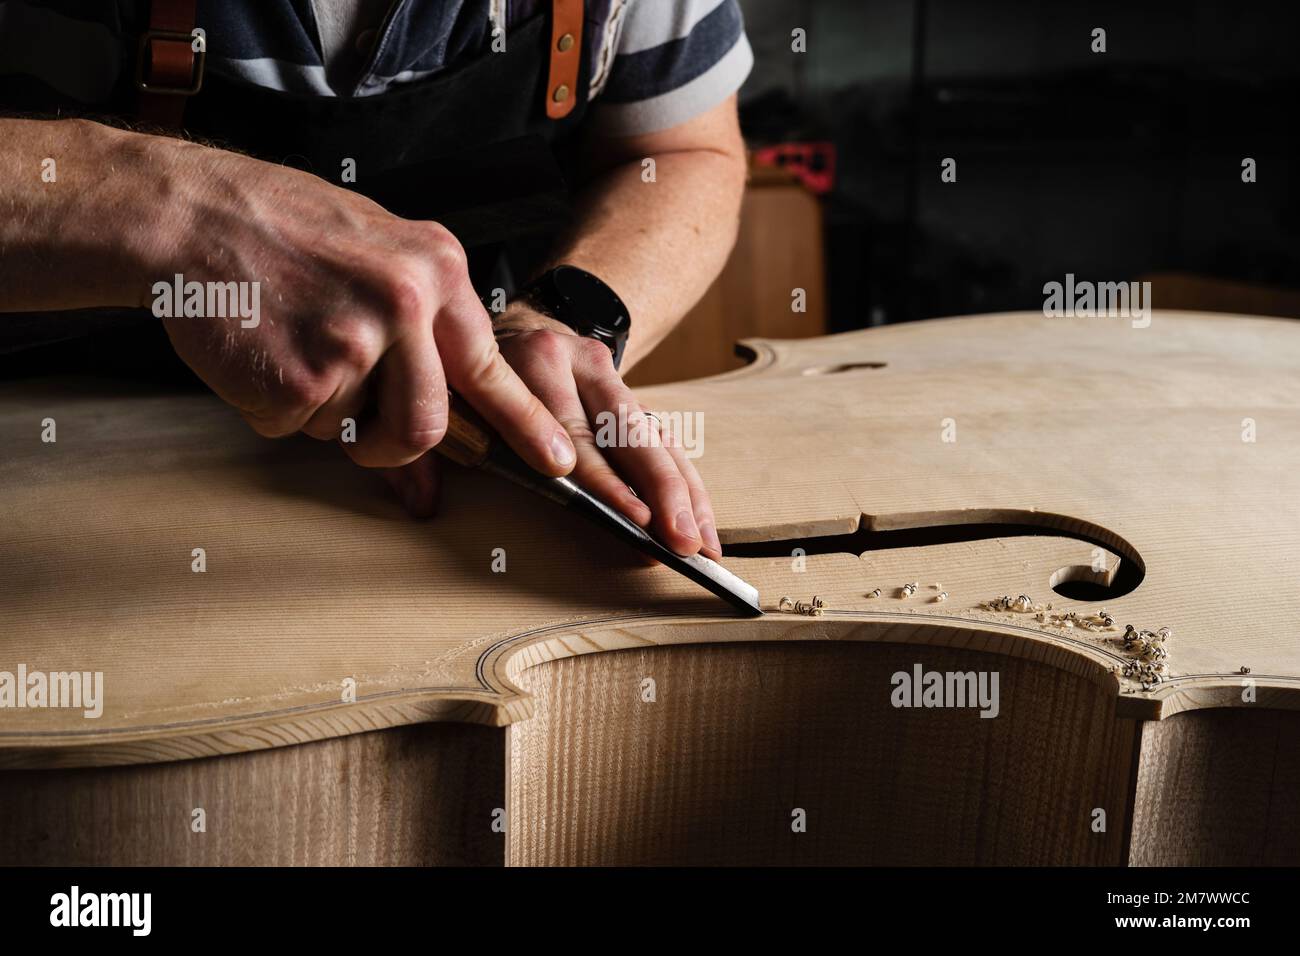 Troyes (north-eastern France): Laurent Demeyere, stringed instrument maker specialized in double bass. Here, making a double bass. Gestures and woodwo Stock Photo